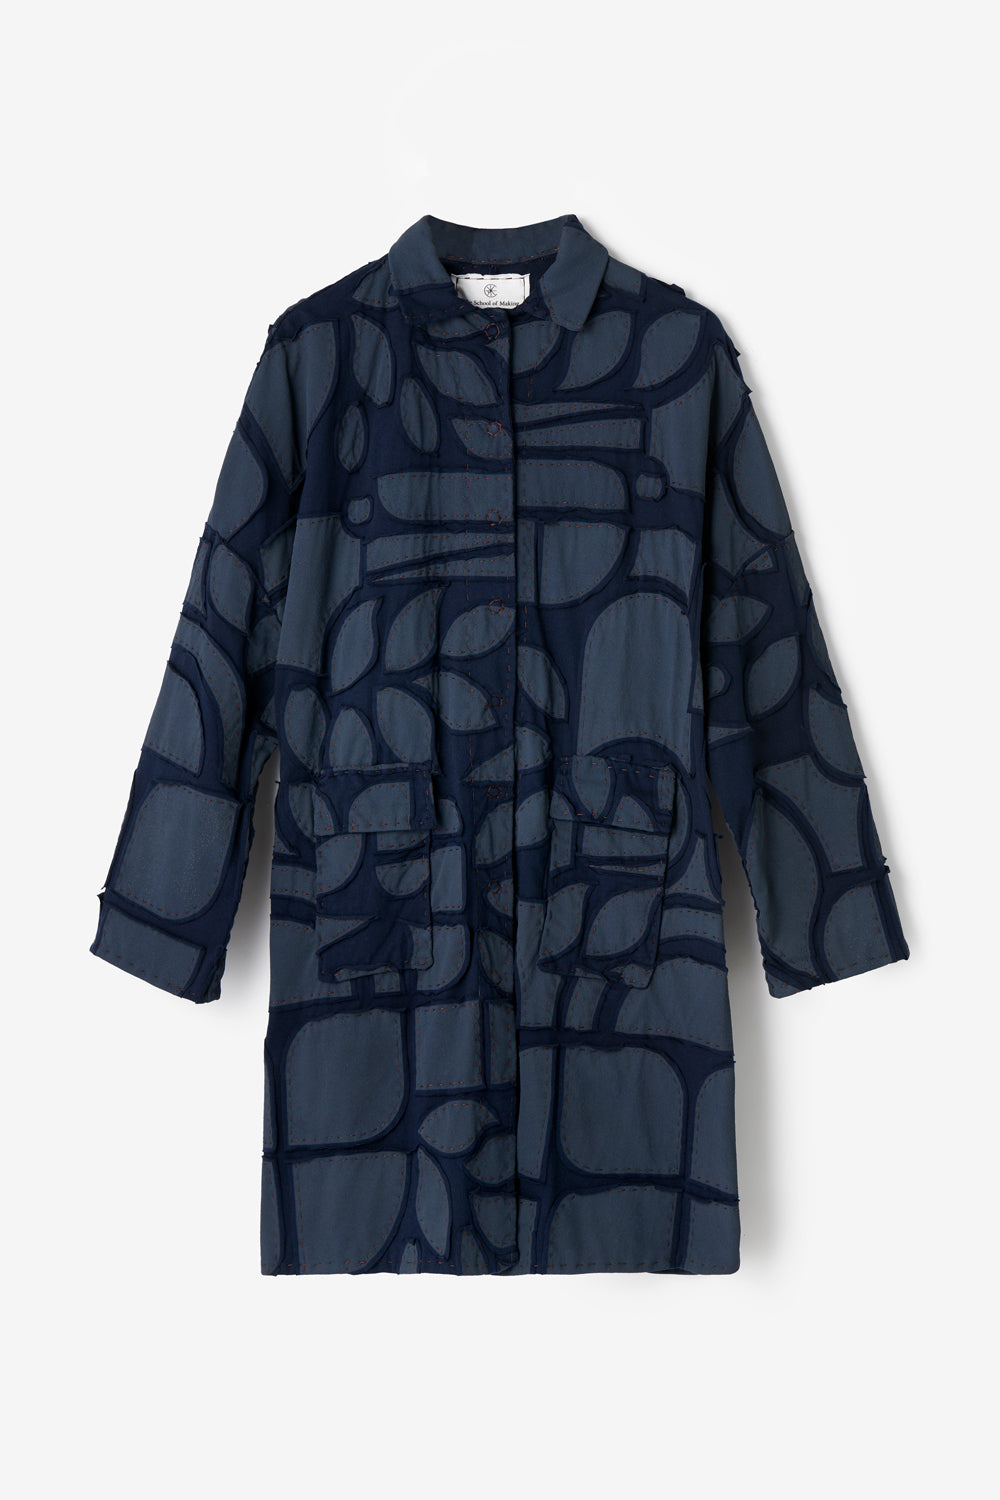 The School of Making Car Coat in navy with abstract stencil design.